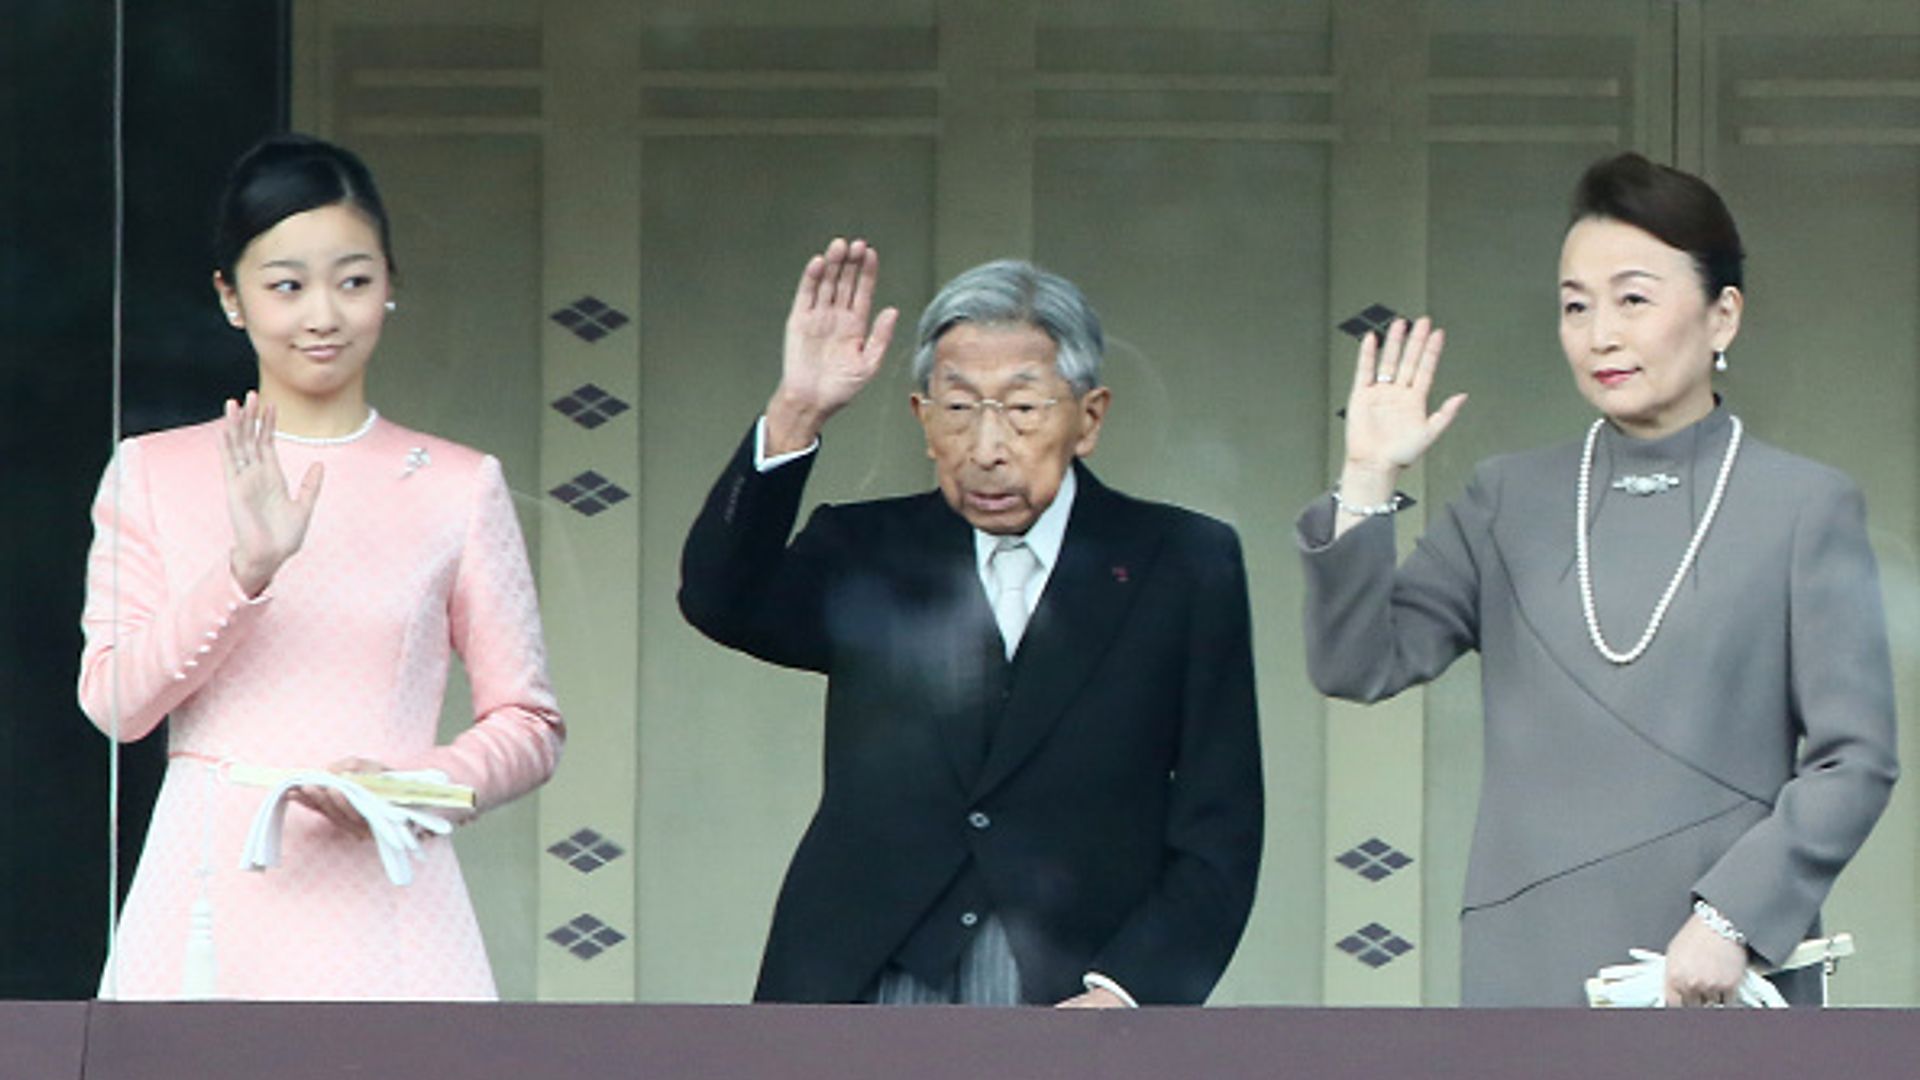 Japan's royals gather for regal New Year's greeting